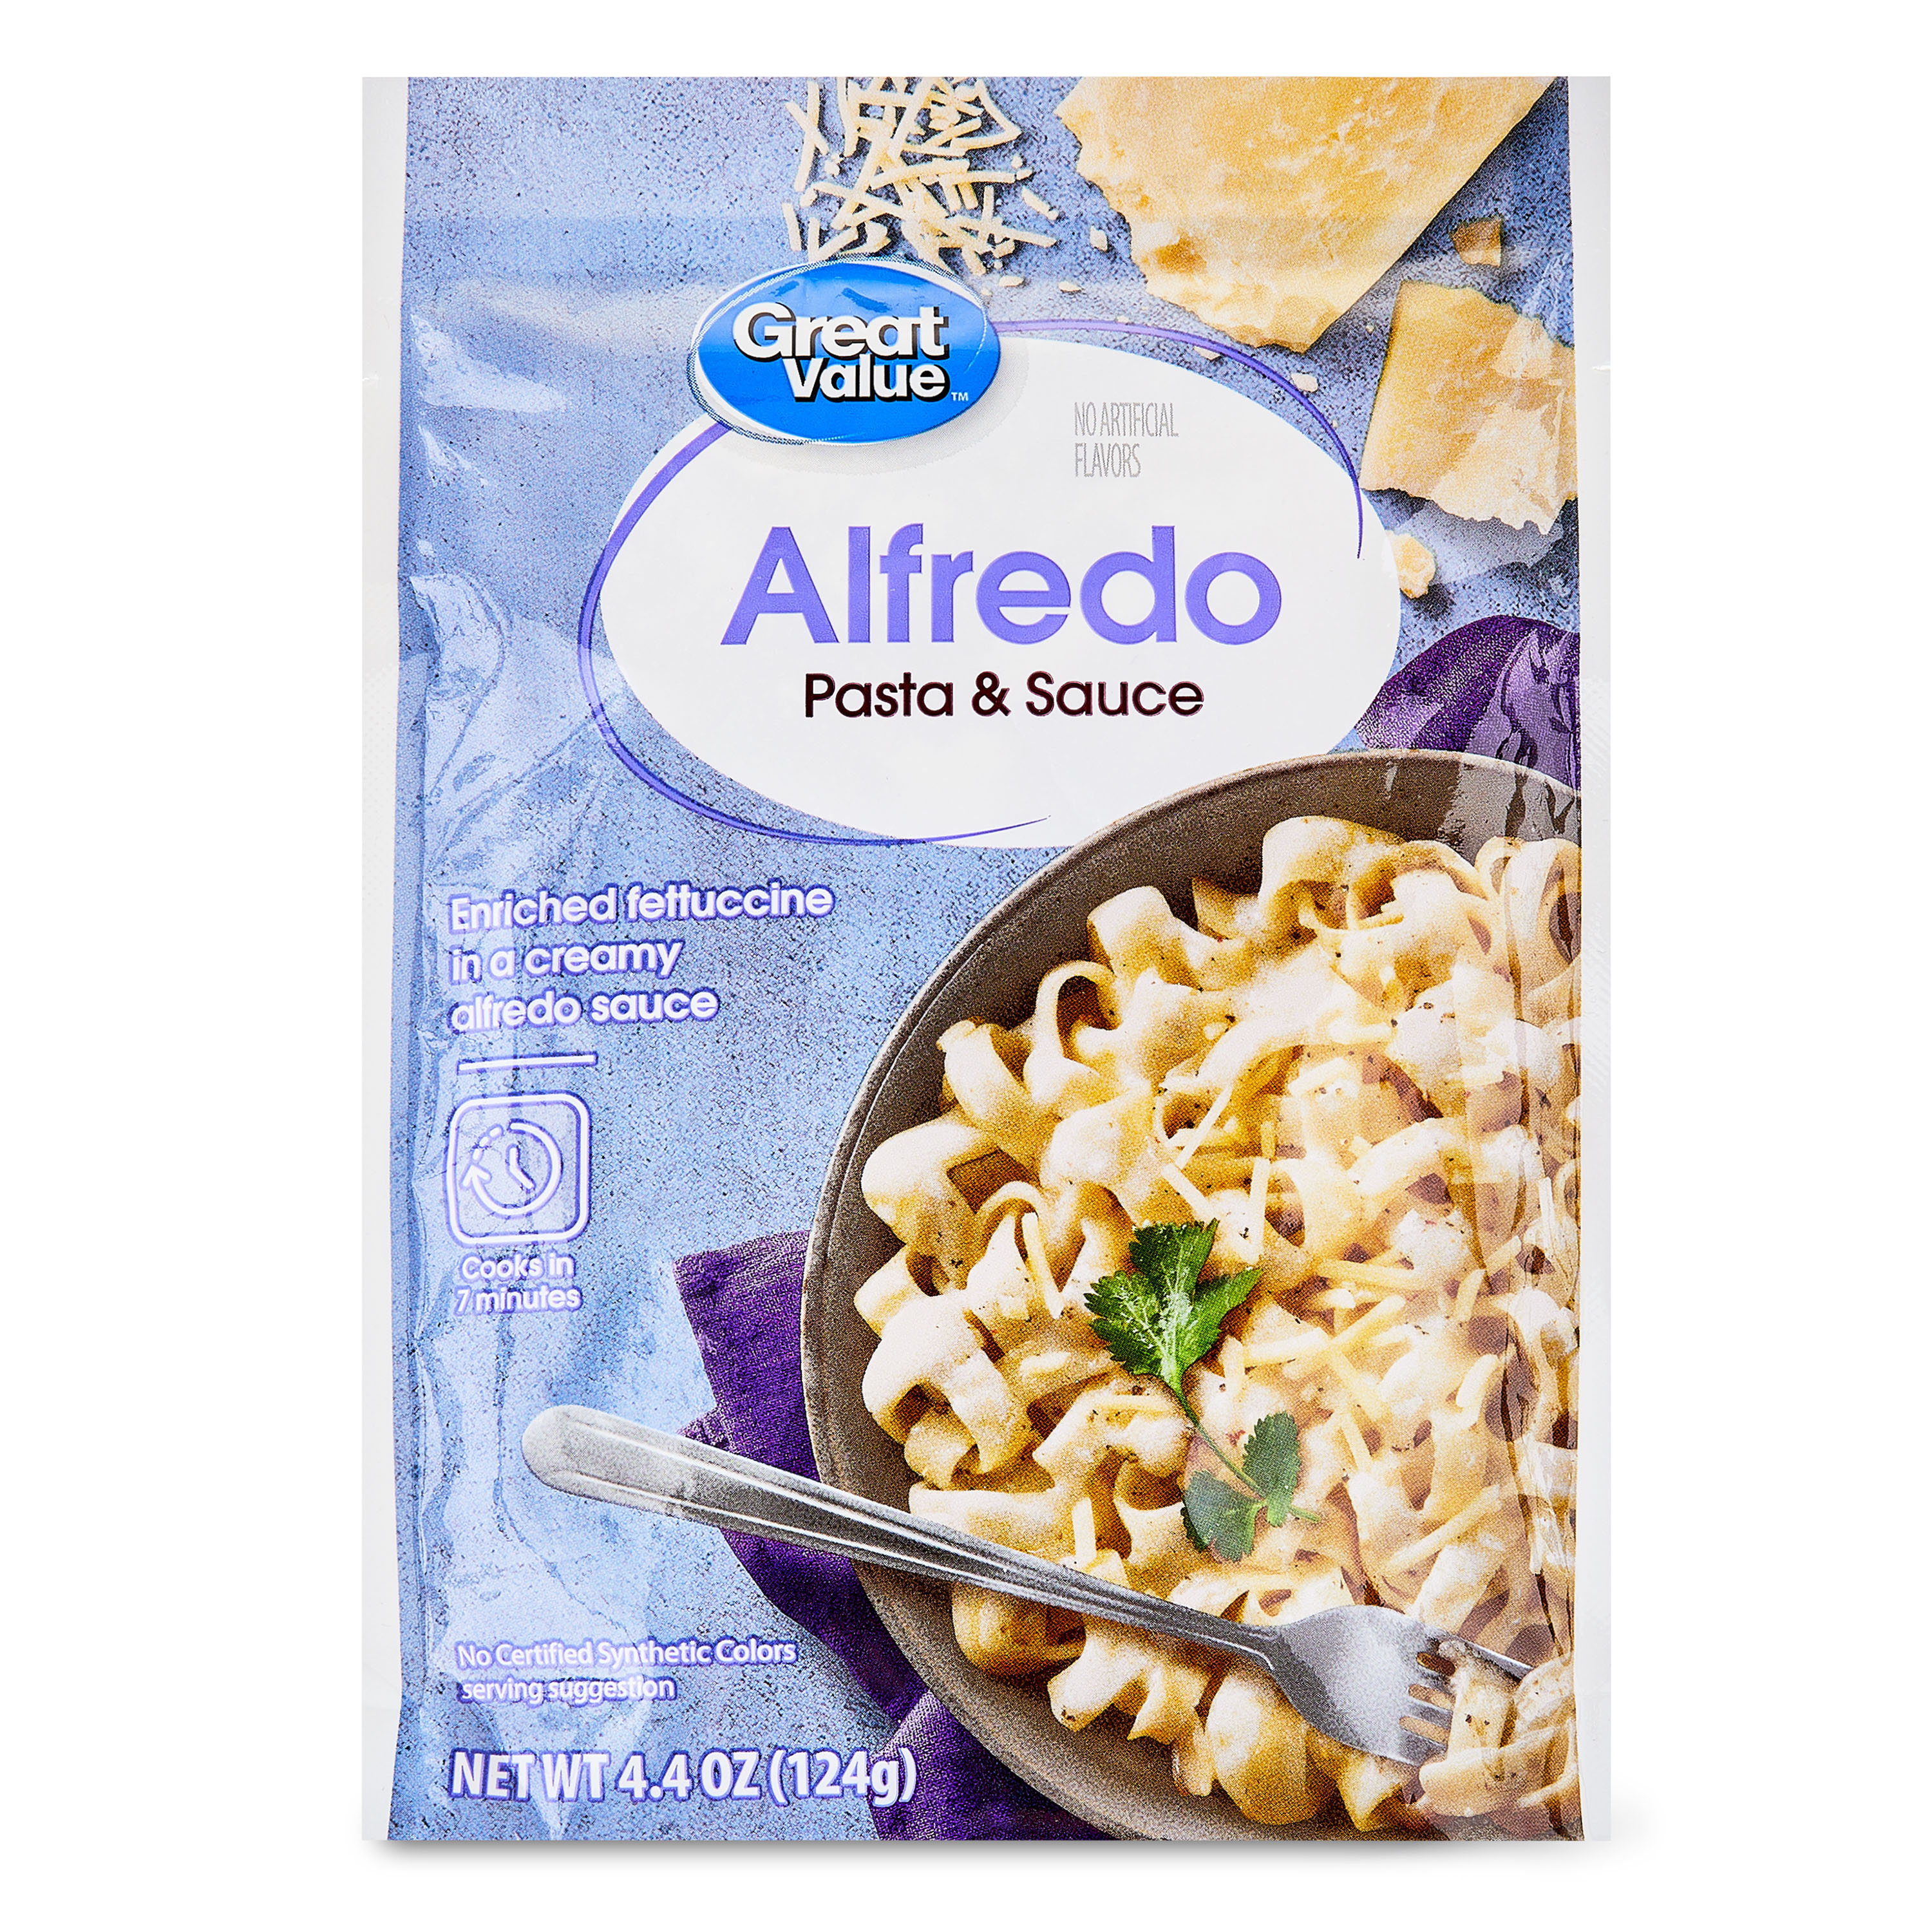 Great Value Alfredo-Style Pasta and Sauce, 4.4 oz - image 1 of 8